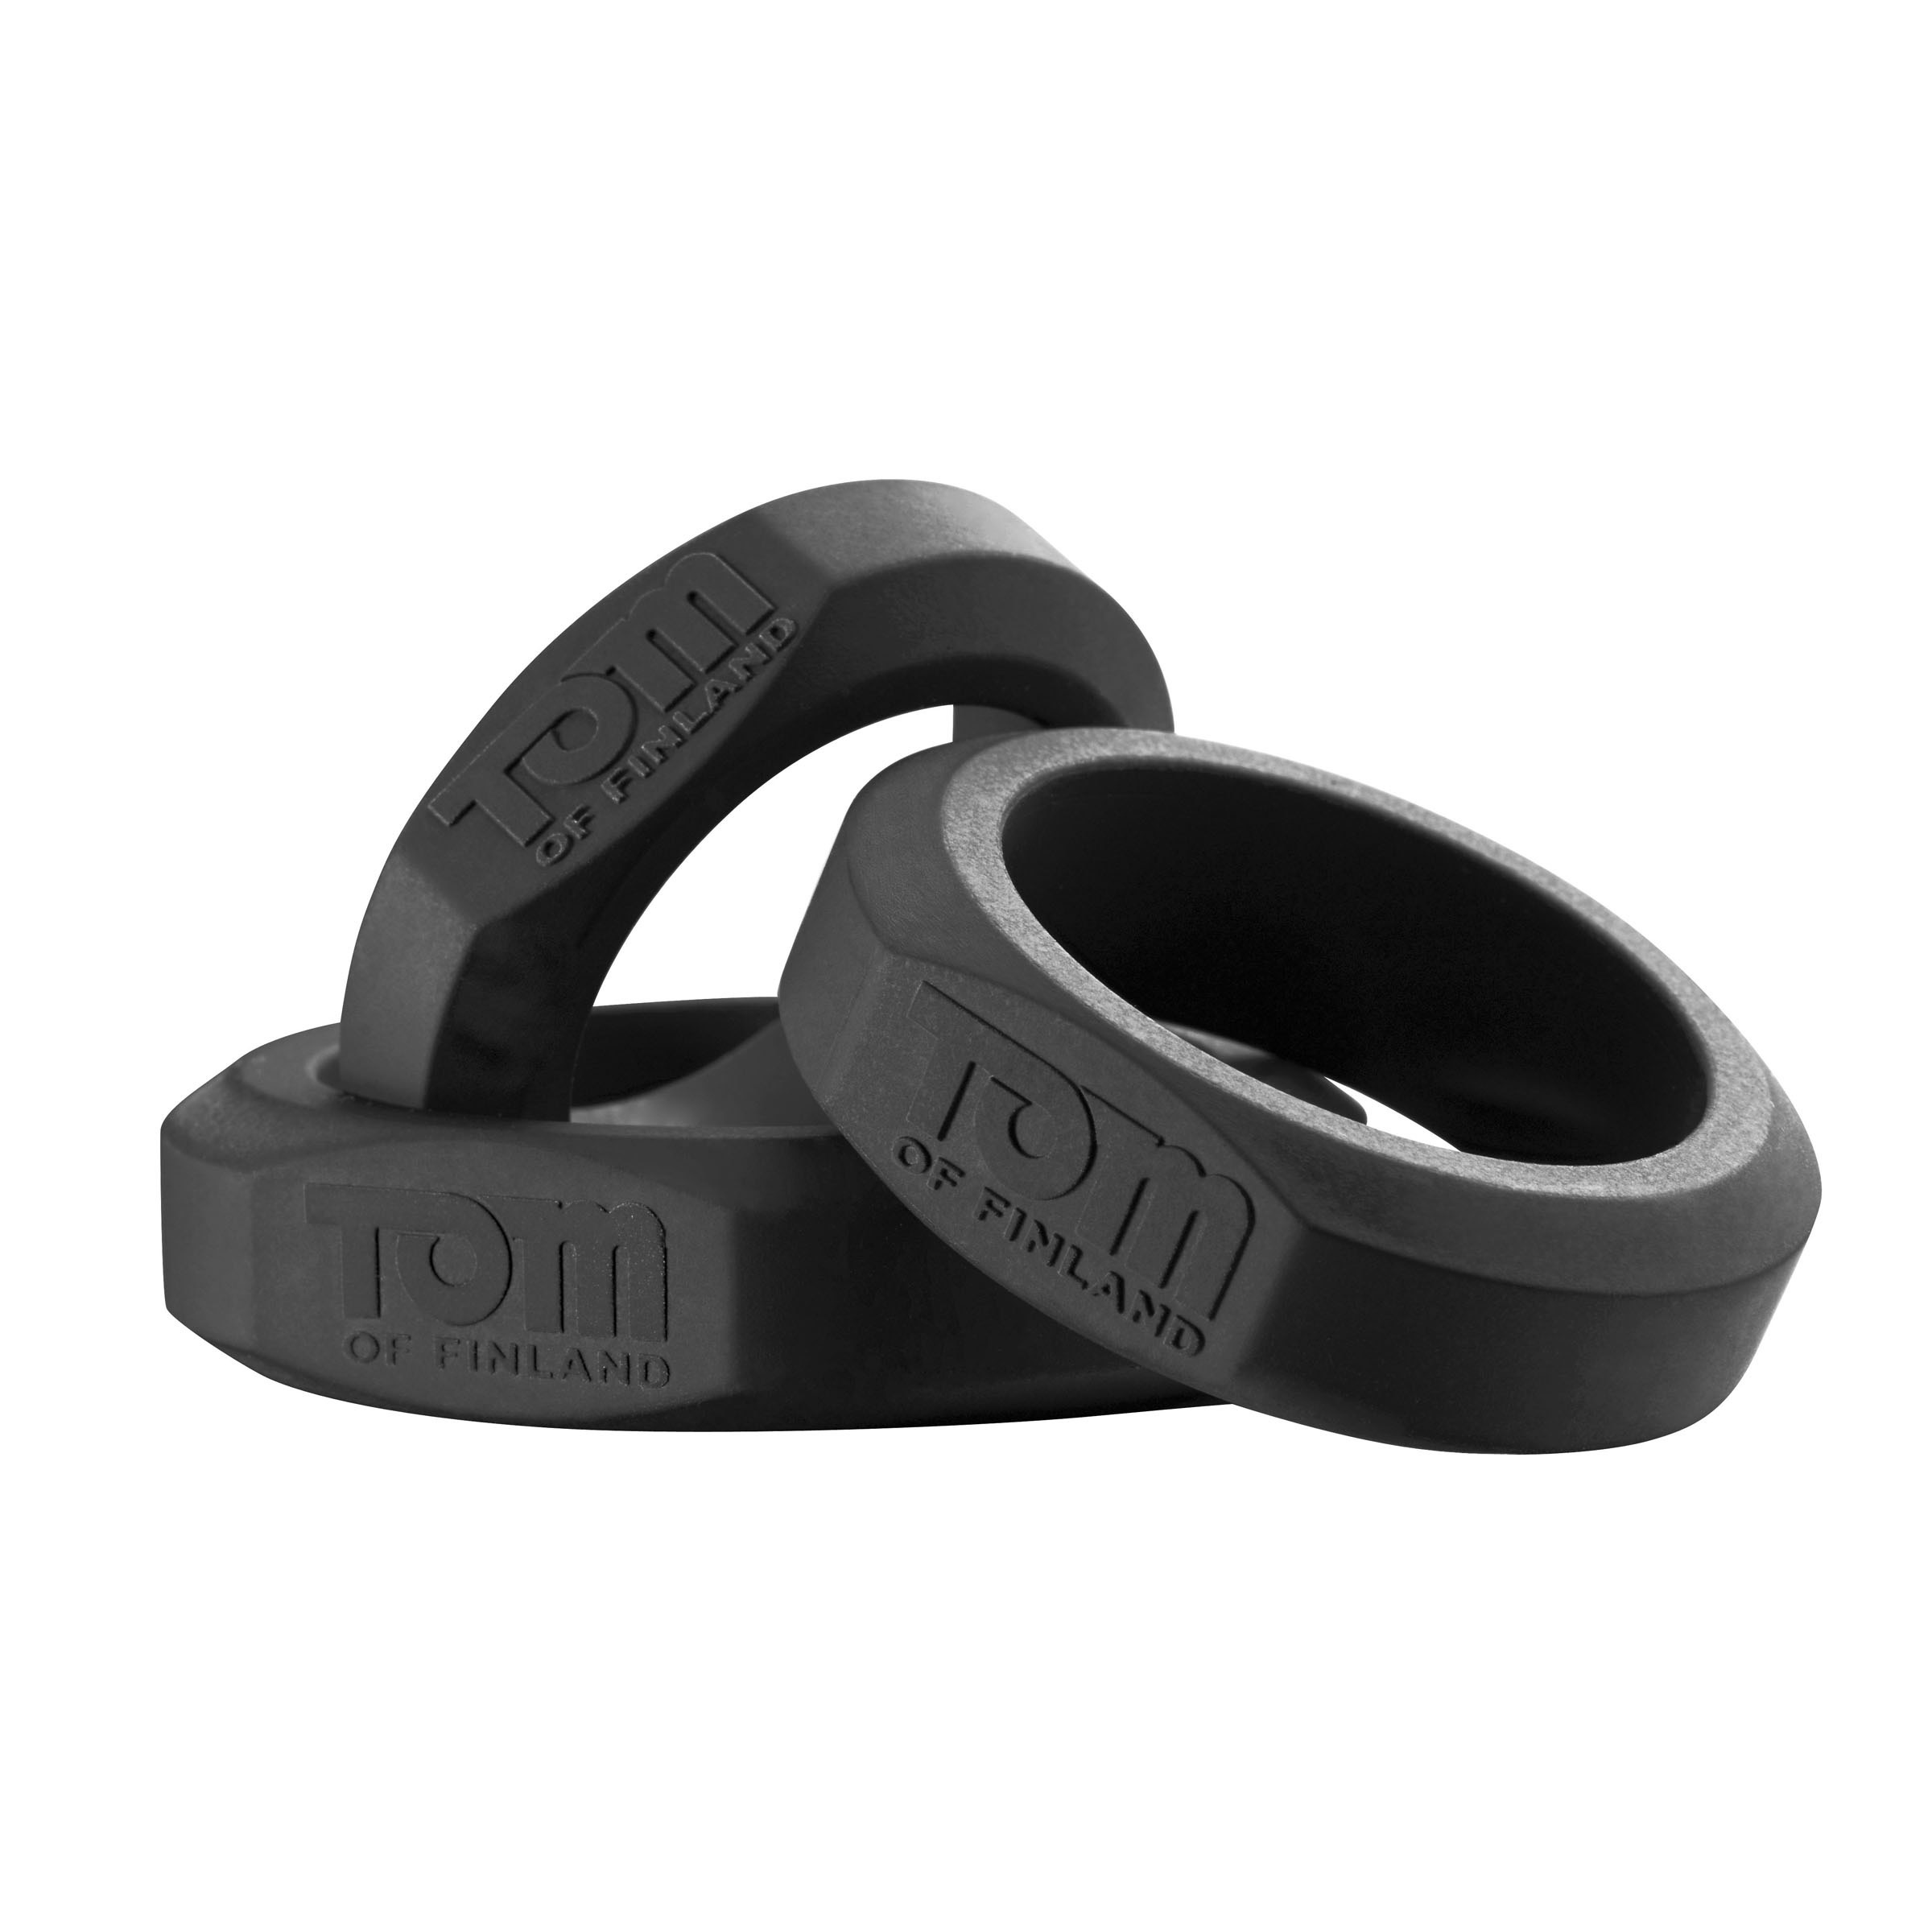 Tom of Finland 3 Piece Silicone Cock Ring Set – Black